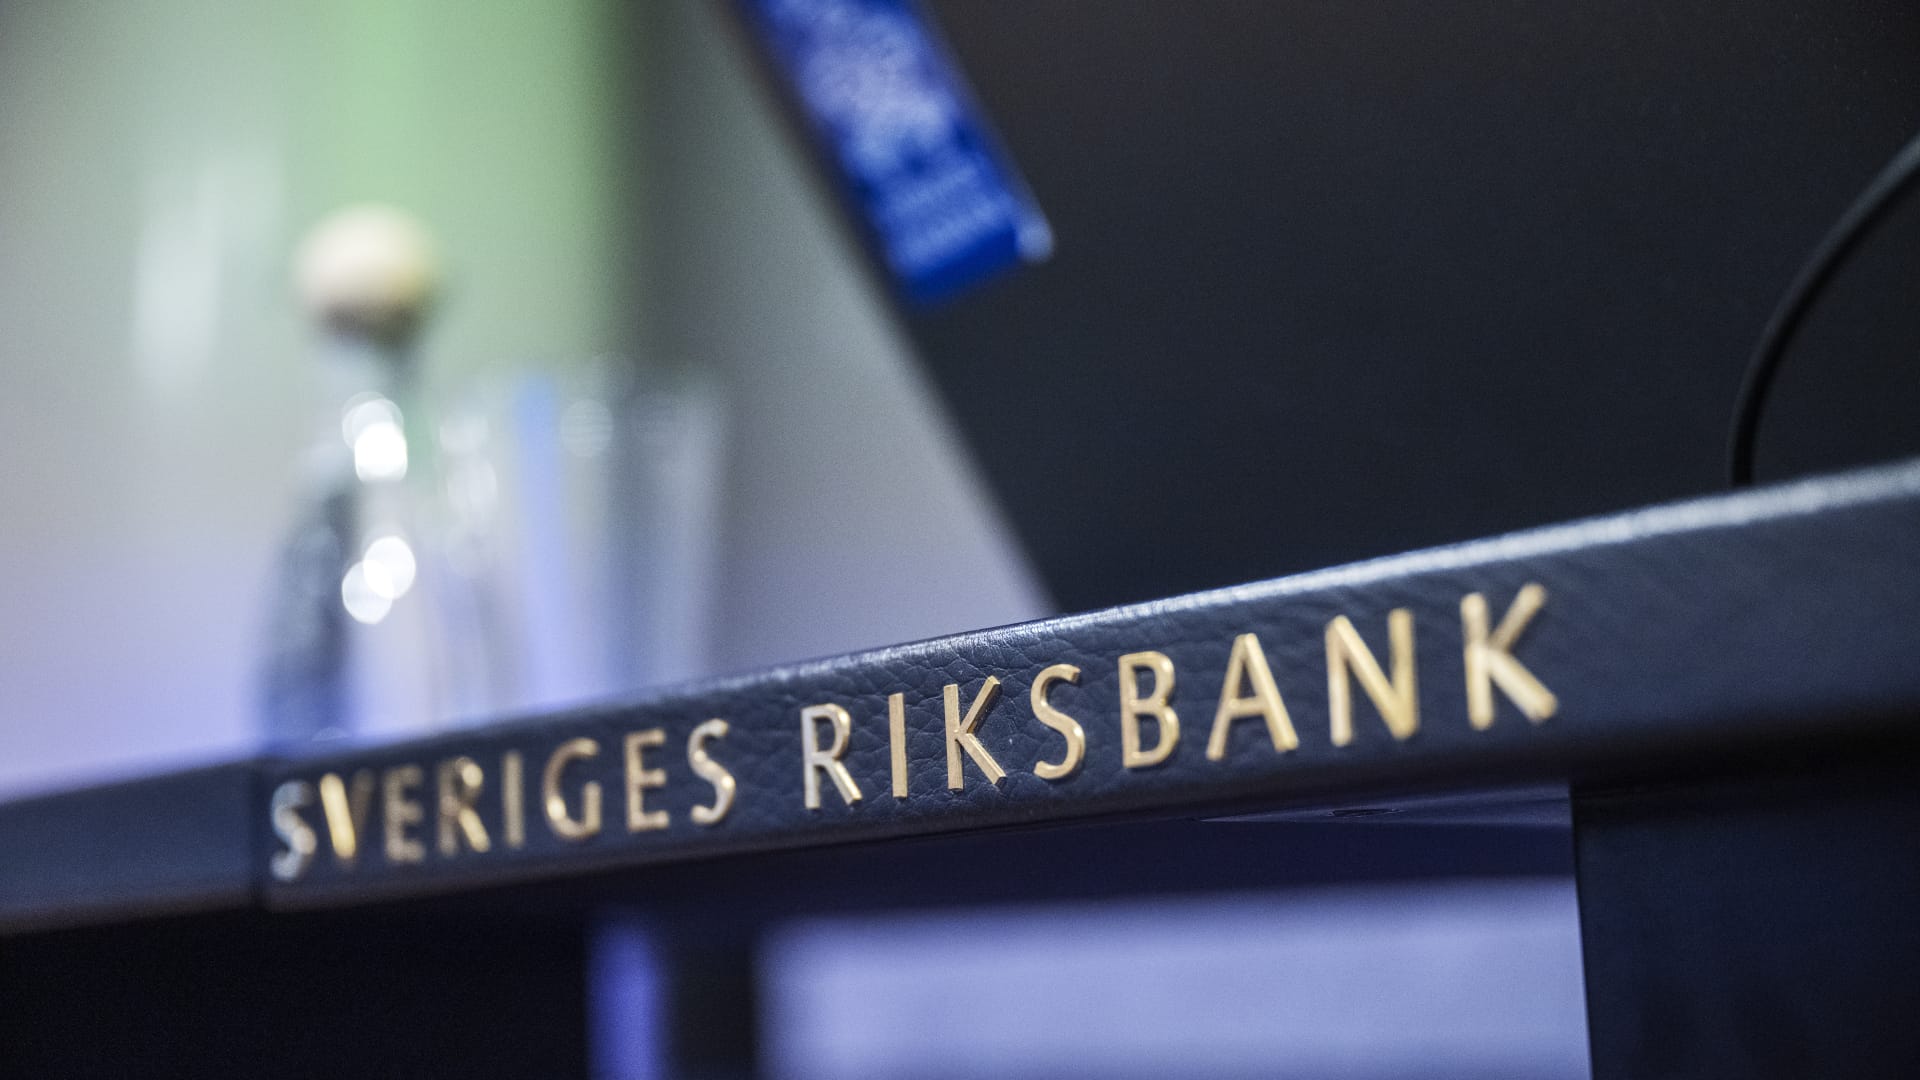 sweden’s-central-bank-launches-100-basis-point-rate-hike,-says-‘inflation-is-too-high’